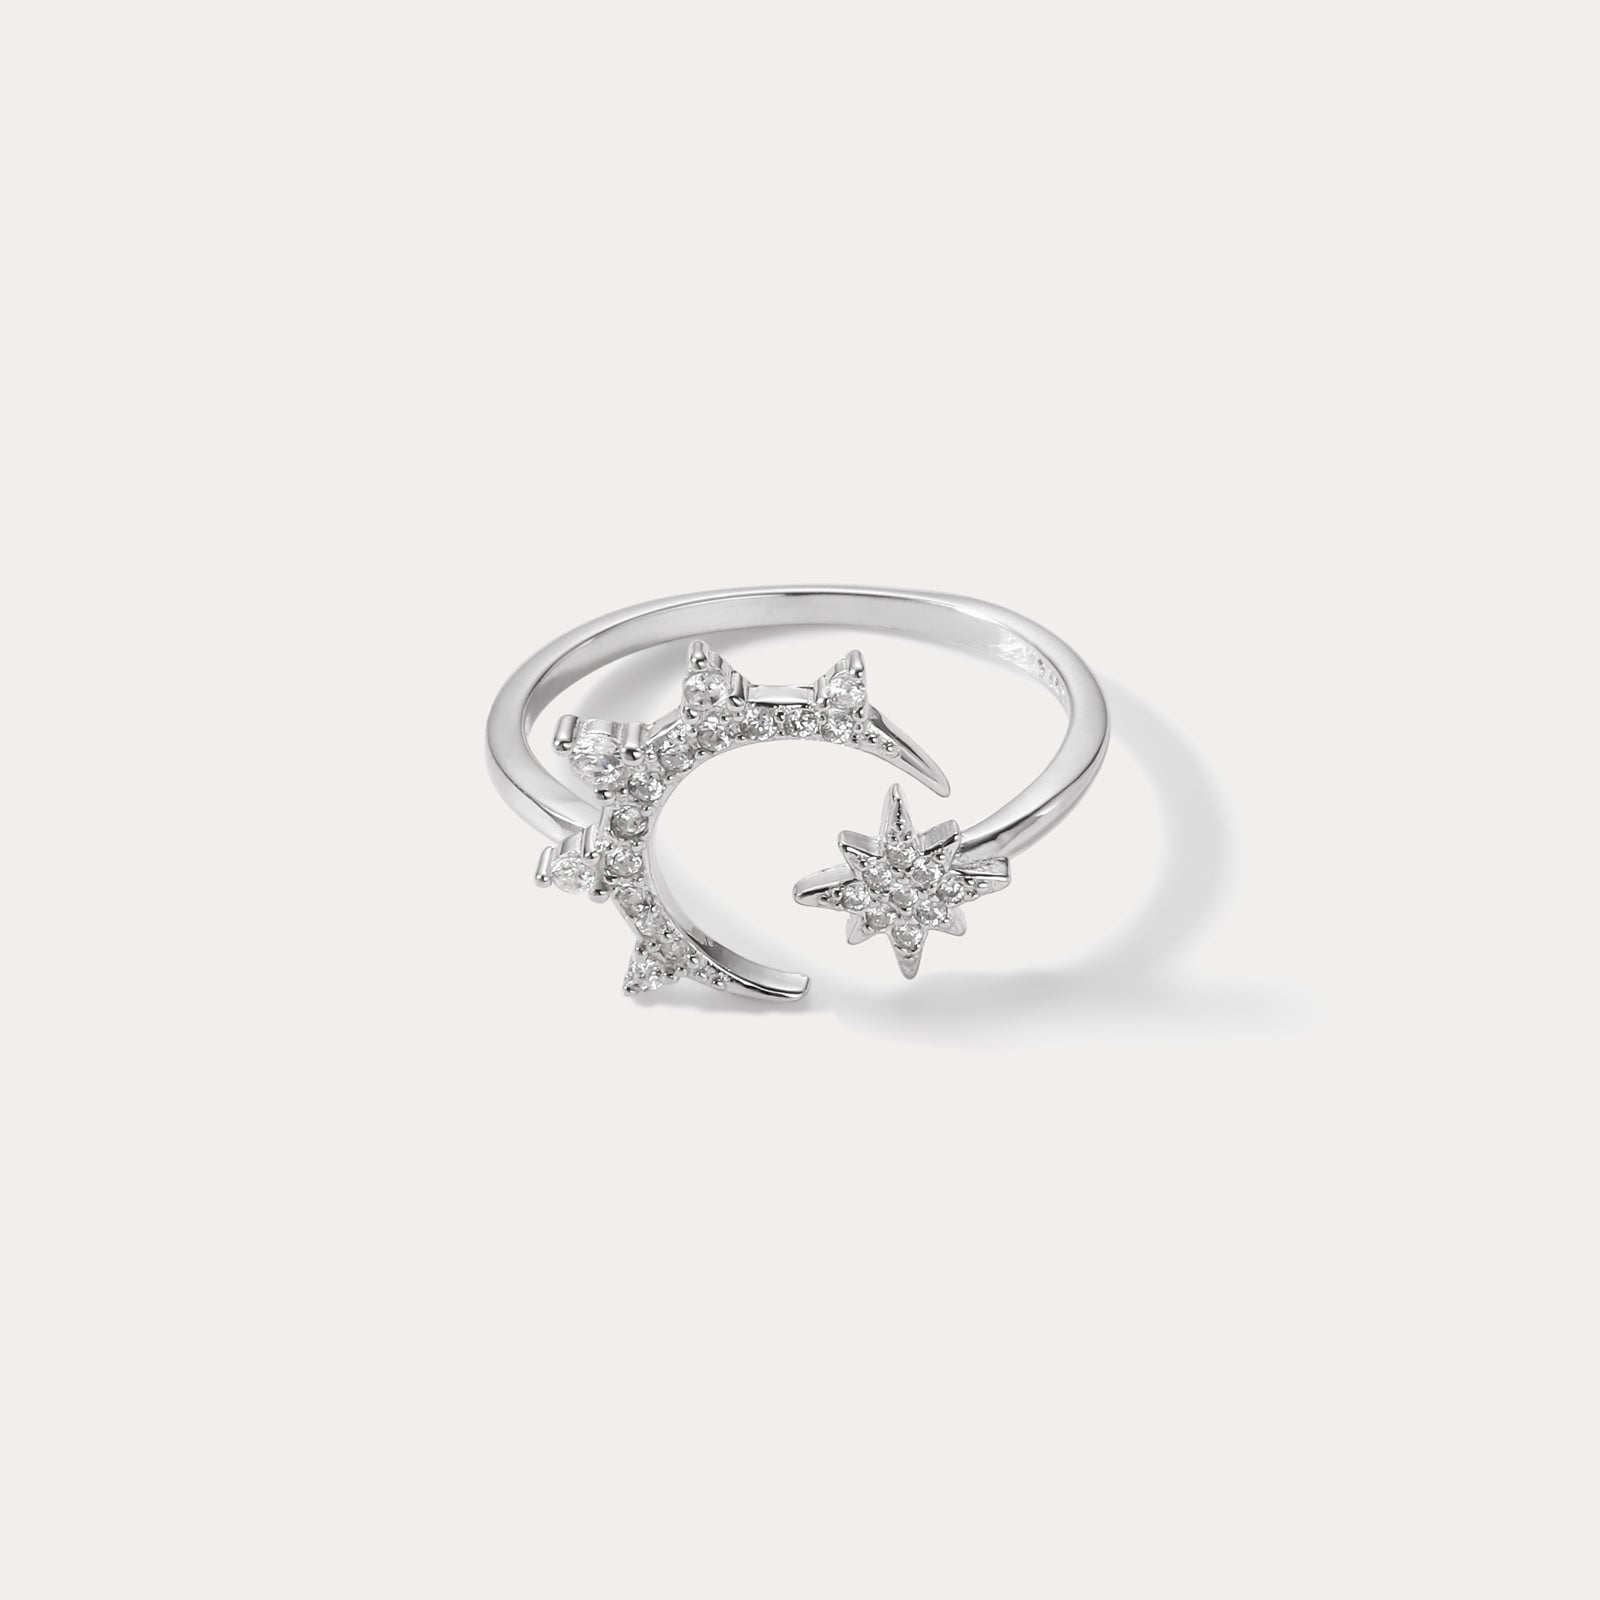 Eight-pointed Star & Moon Wedding Ring